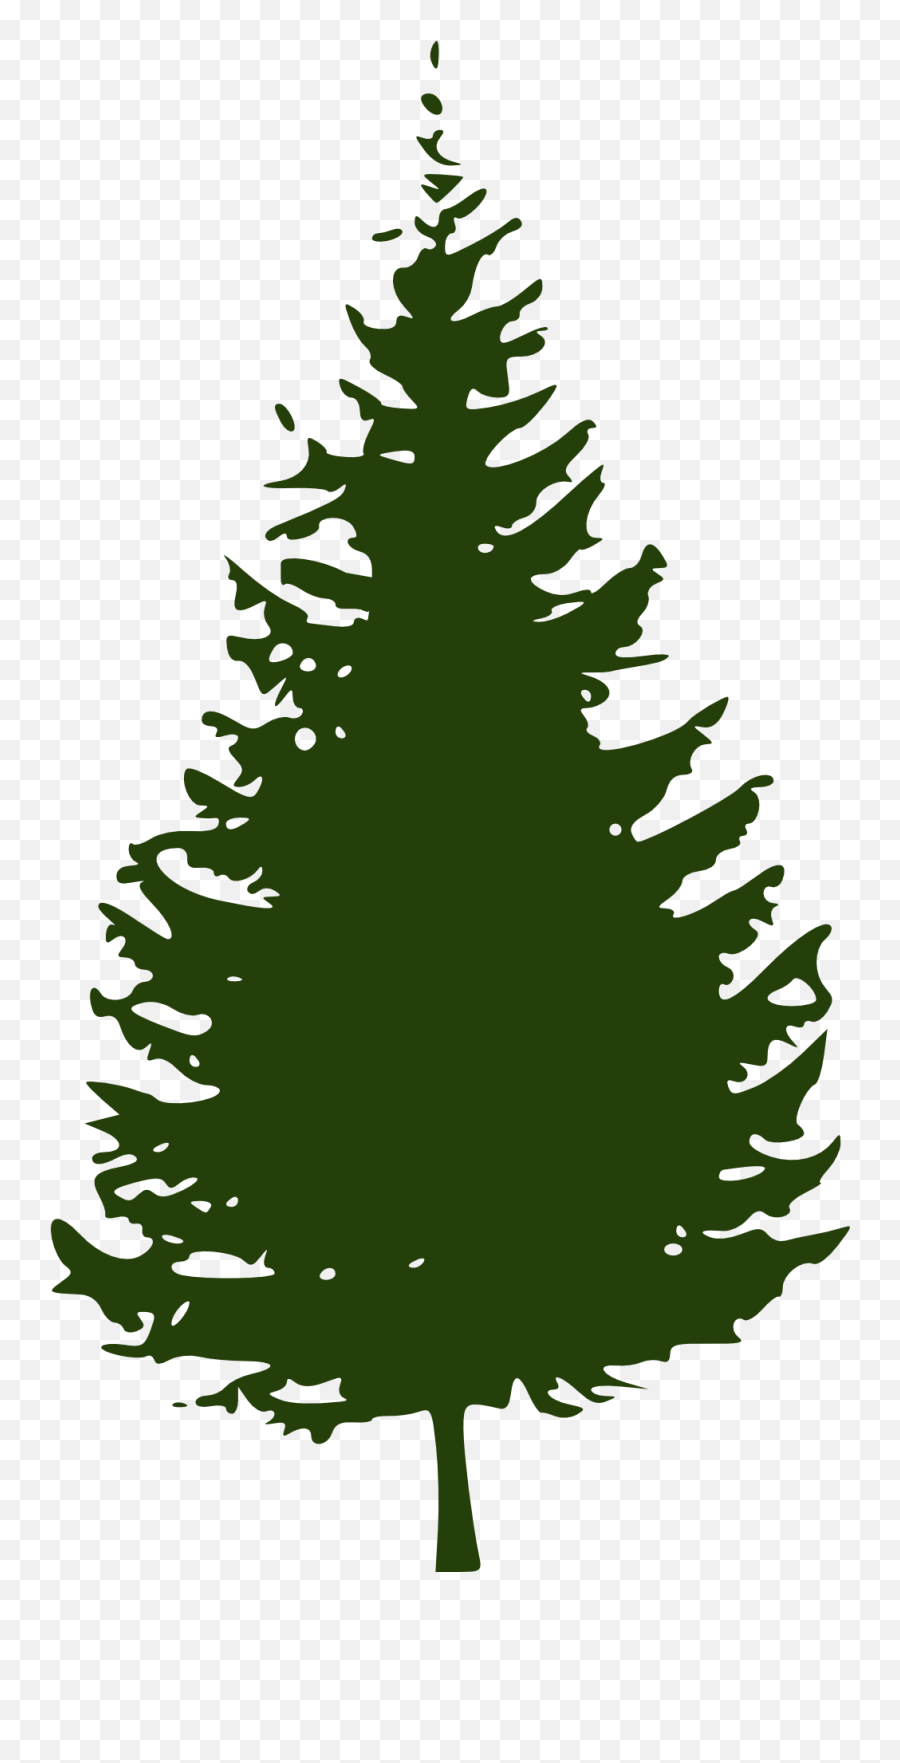 Clipart Of Spruce Conifer Tree Free Image Download Emoji,Cypress Tree Clipart